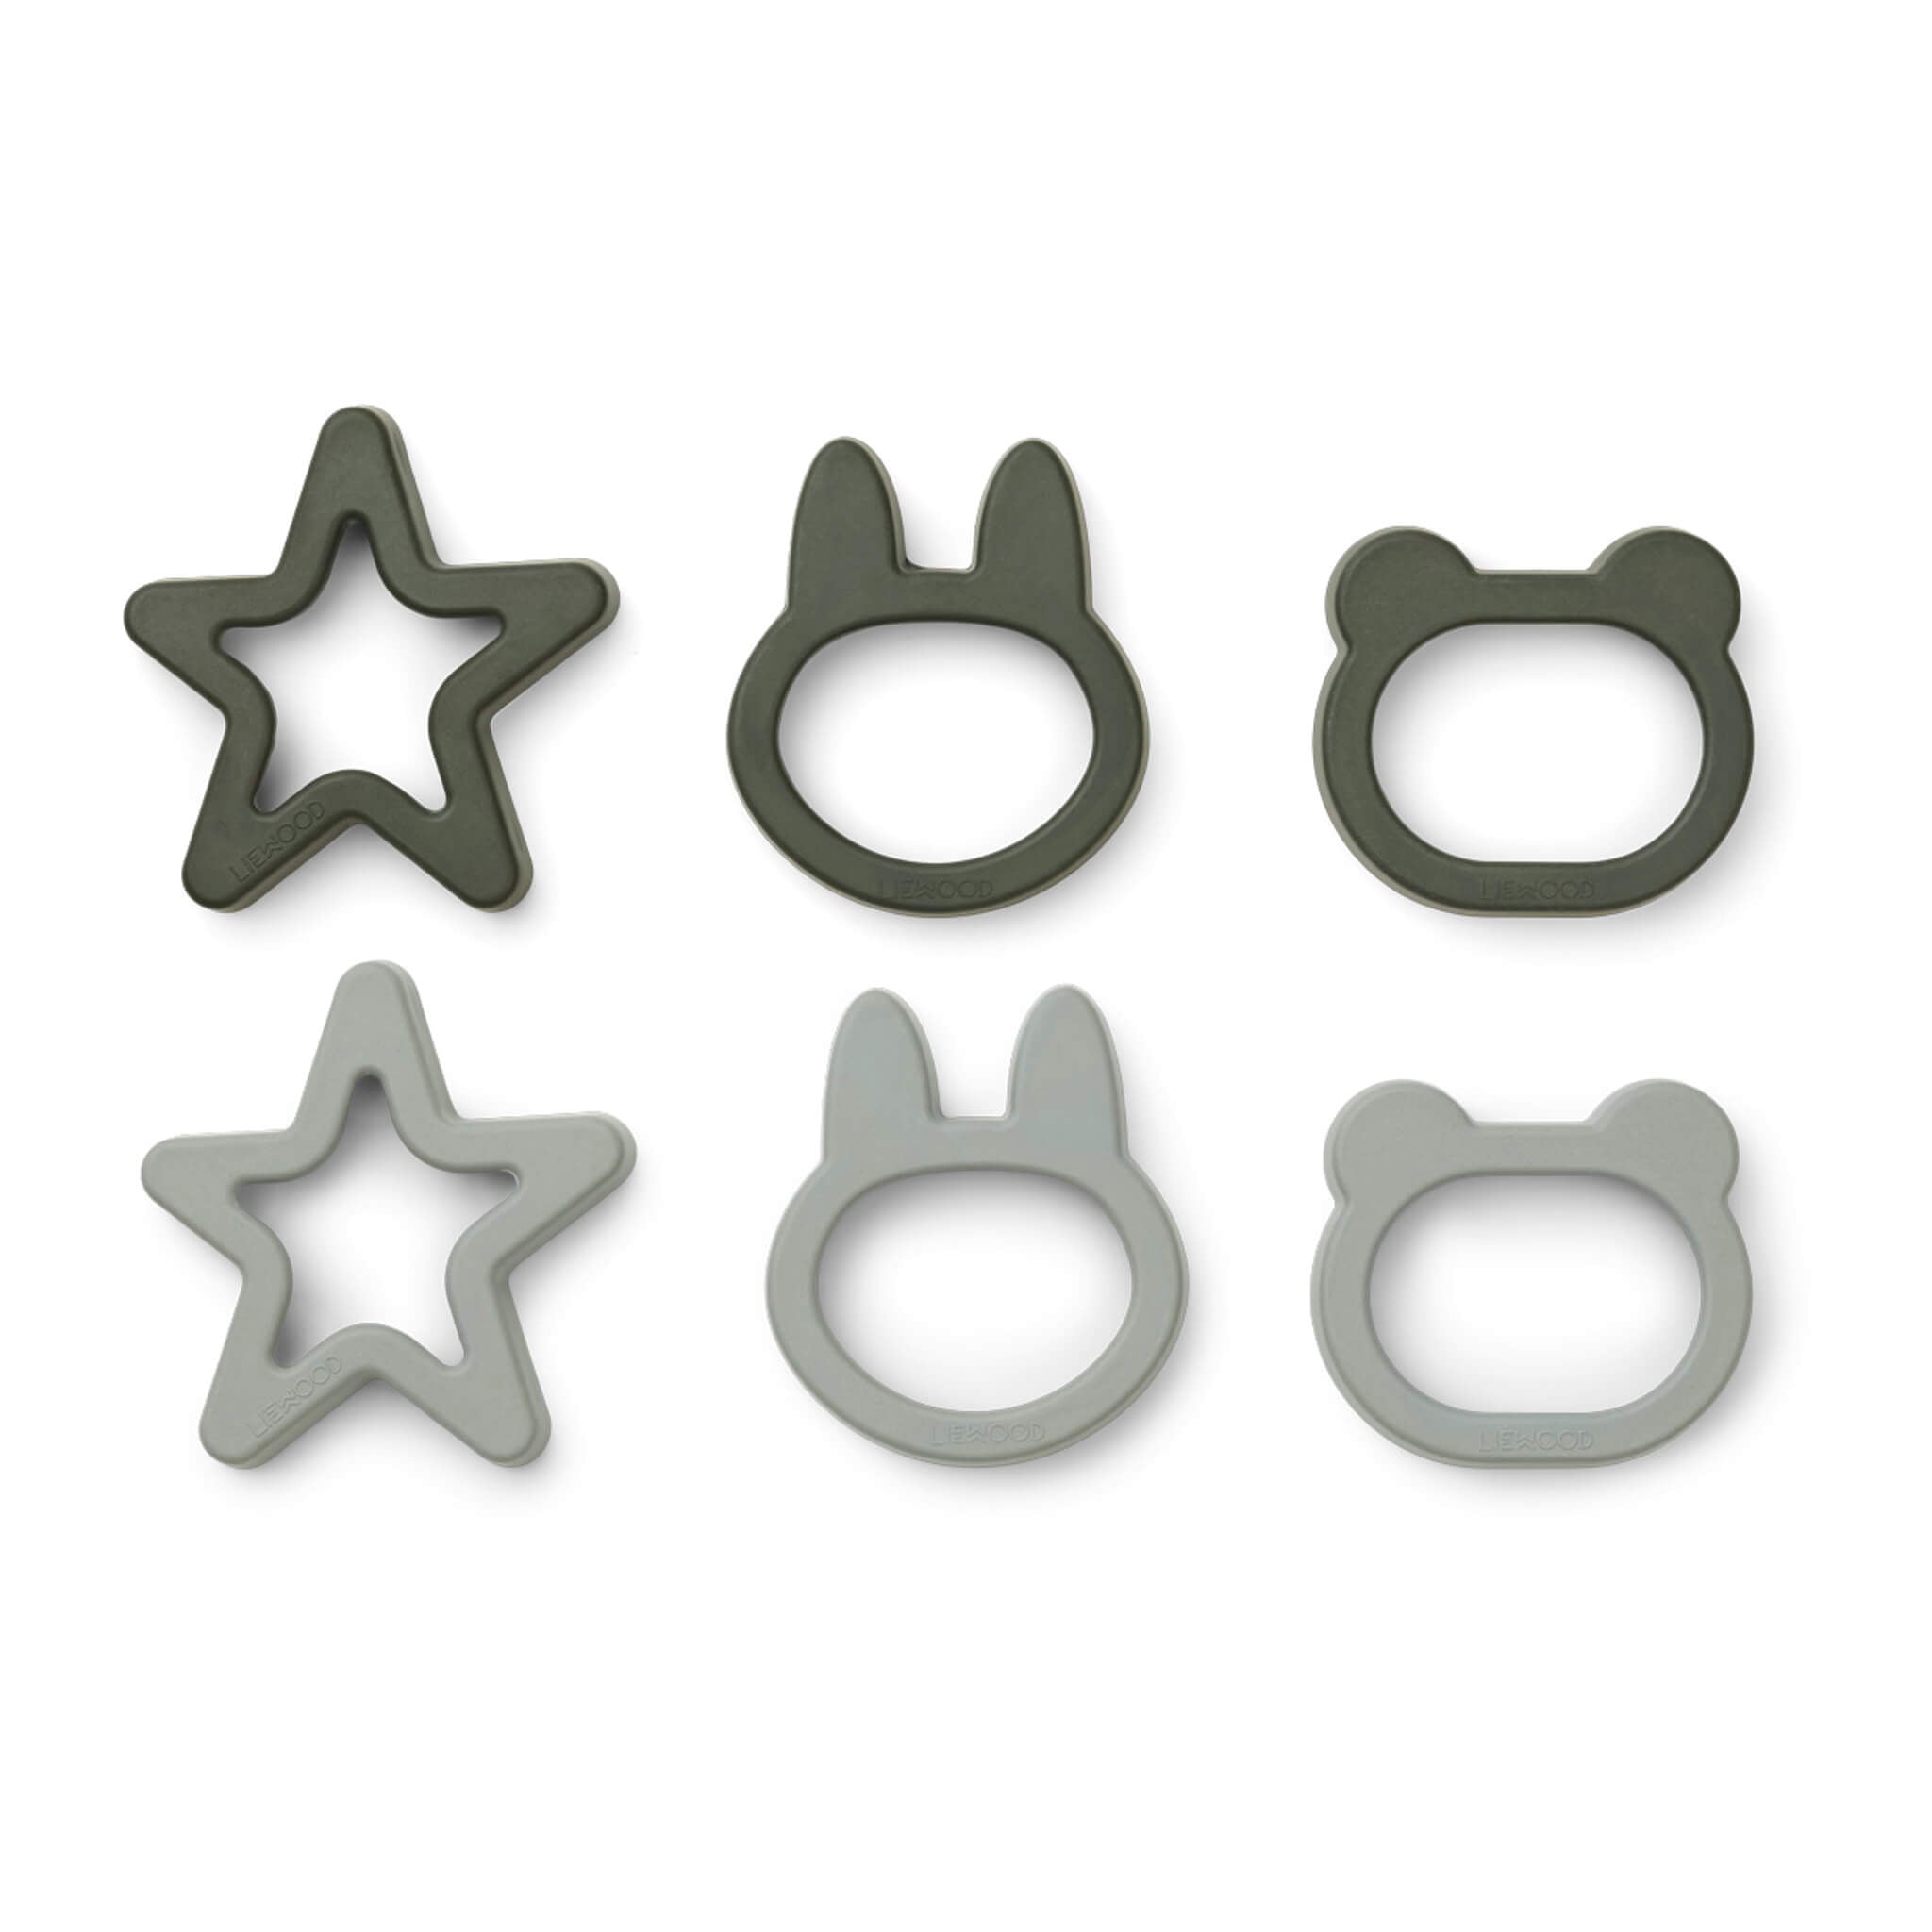 Cookie Cutters - Hunter Green (6 pack)